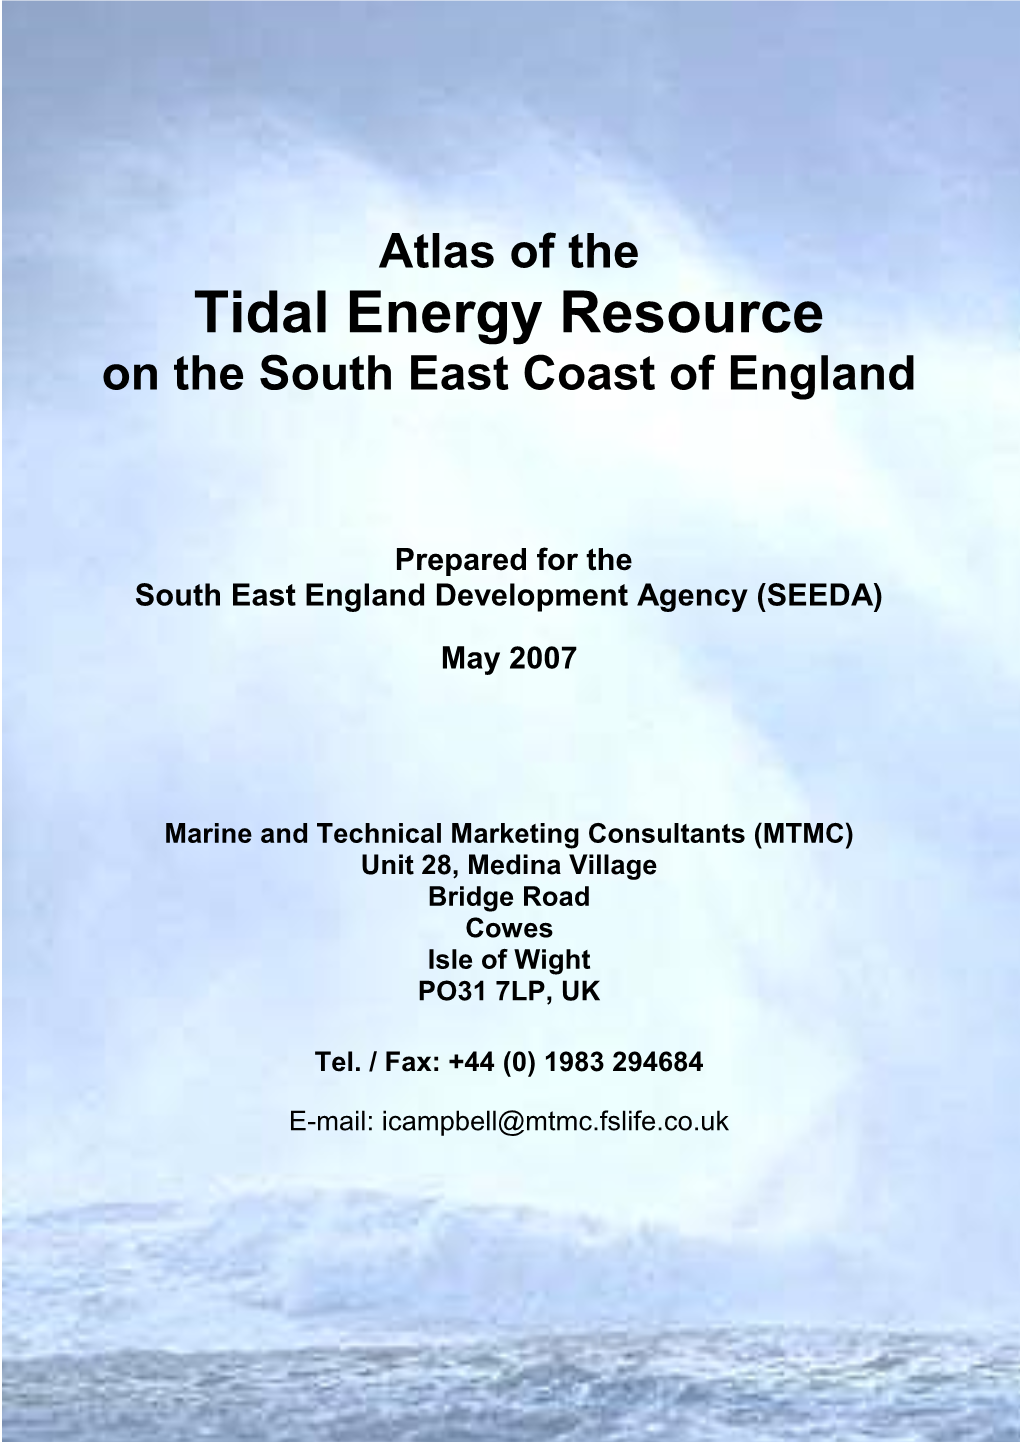 Atlas of the Tidal Energy Resource on the South East Coast of England